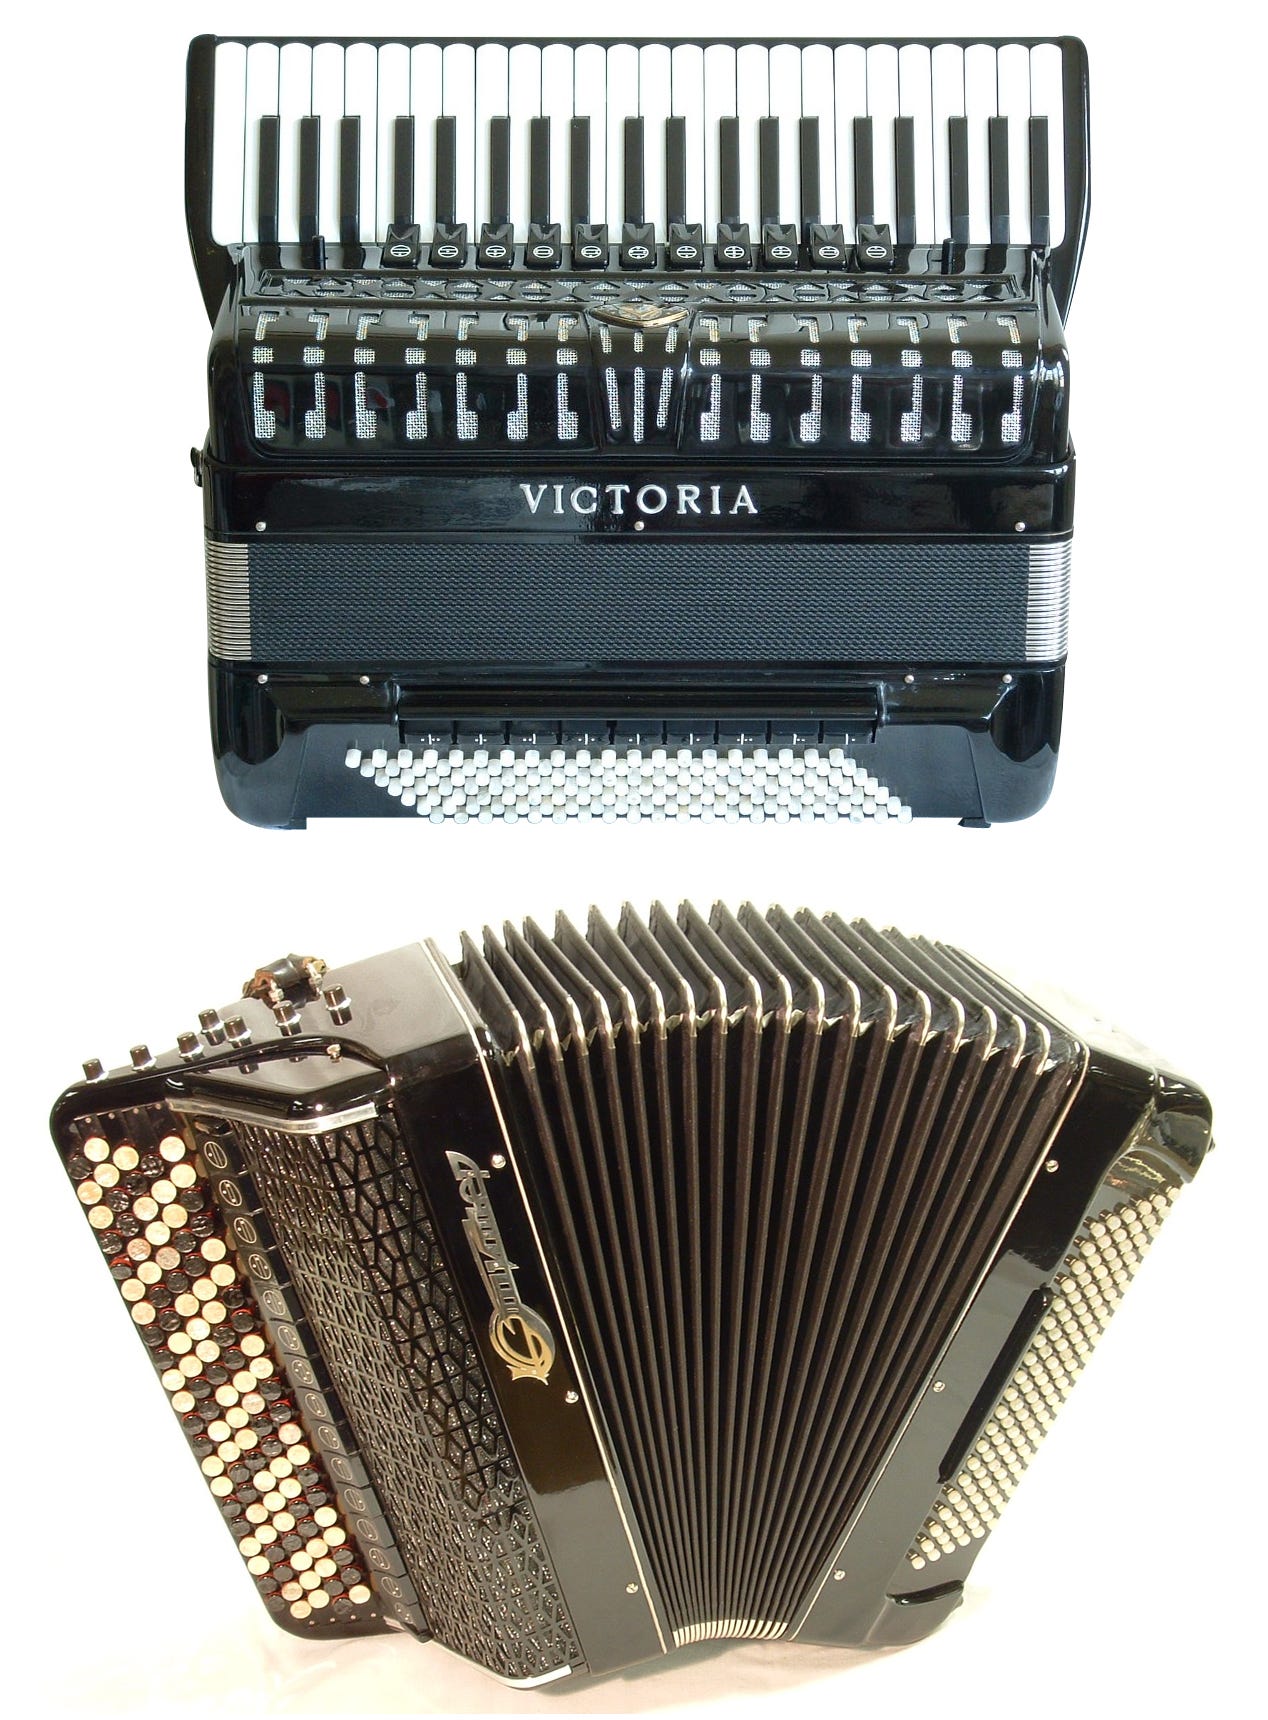 The accordion: the user interface metaphor of the future!